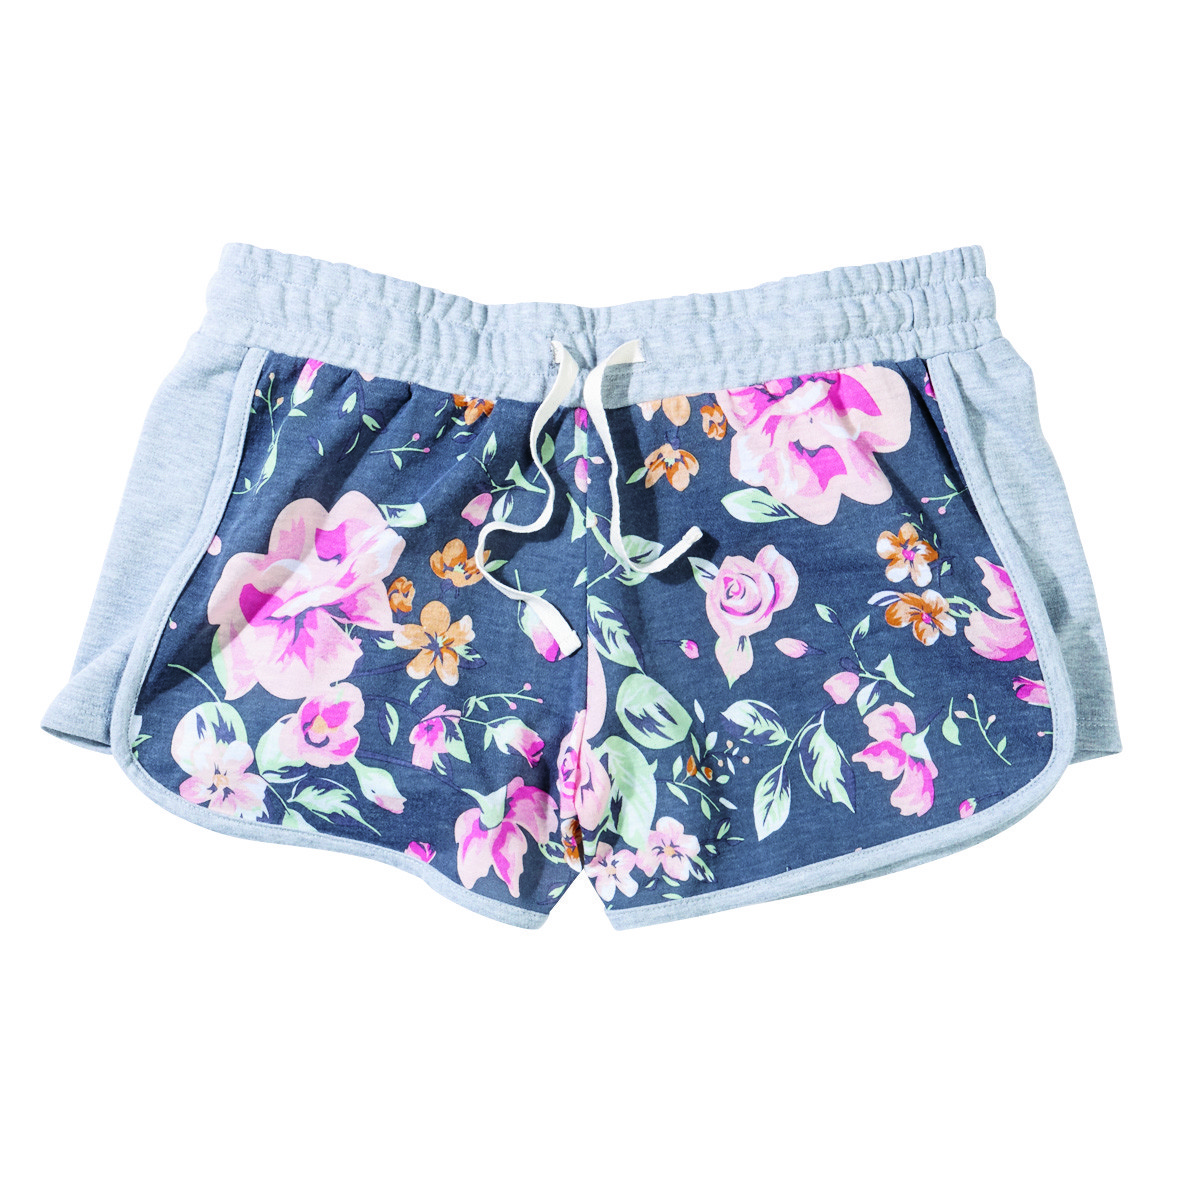 The Warehouse Garage Floral Track Shorts $20